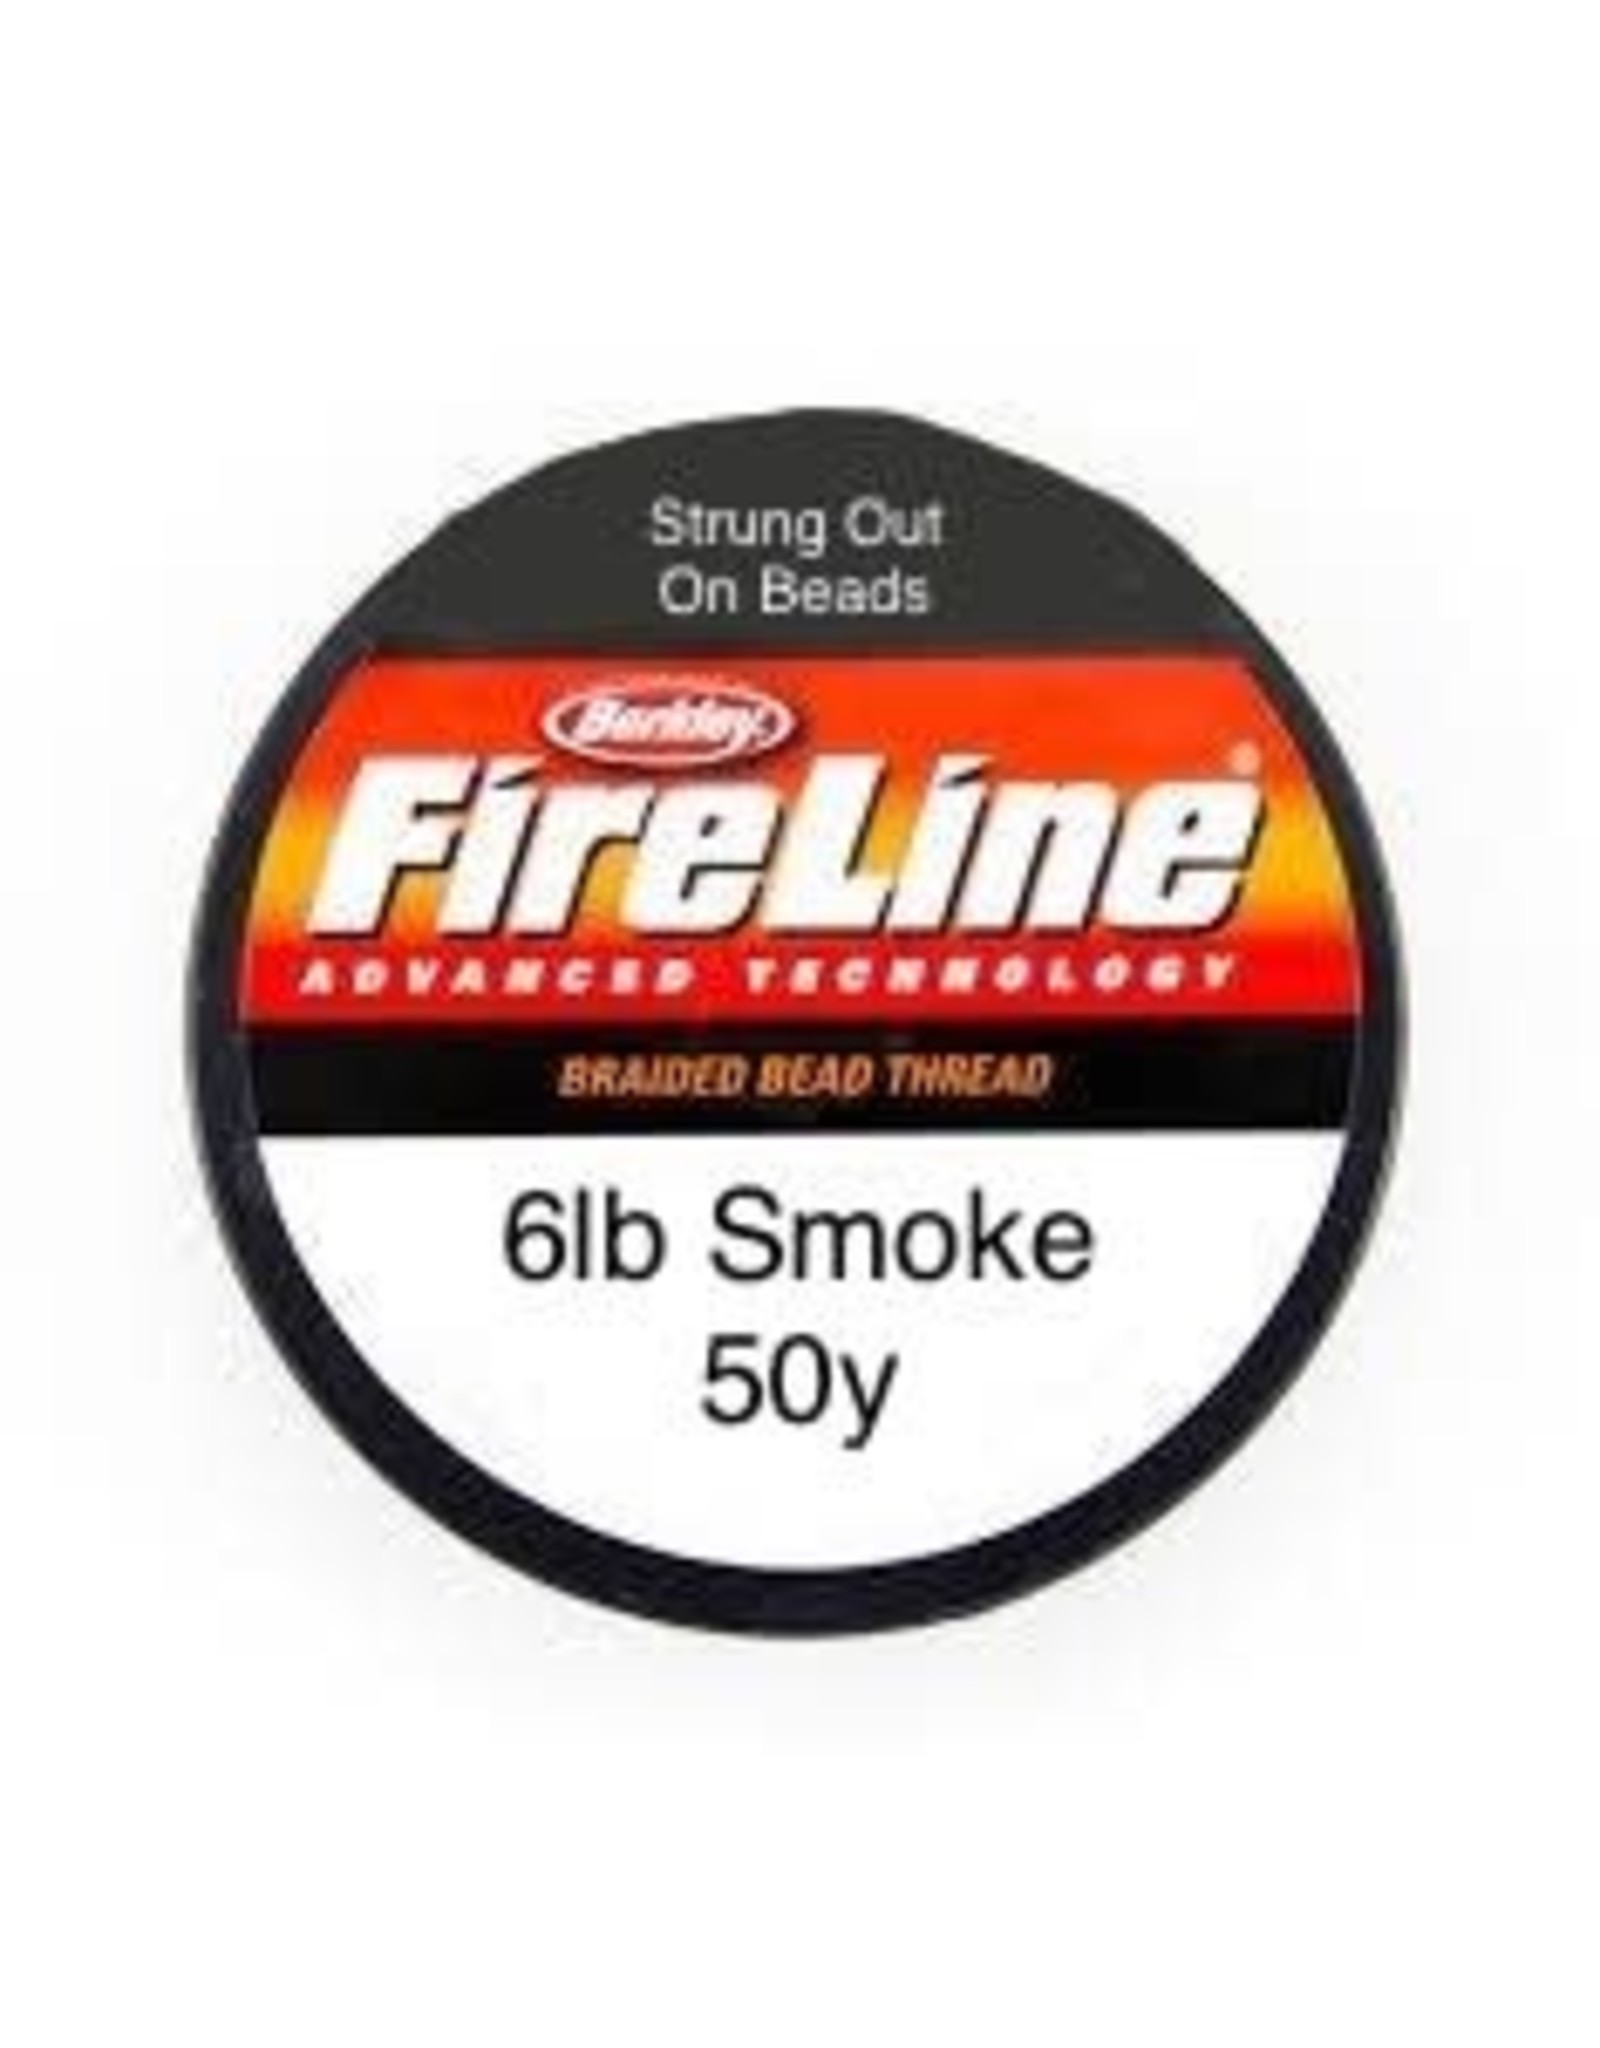 6lb Fireline Smoke x50y - Strung Out On Beads